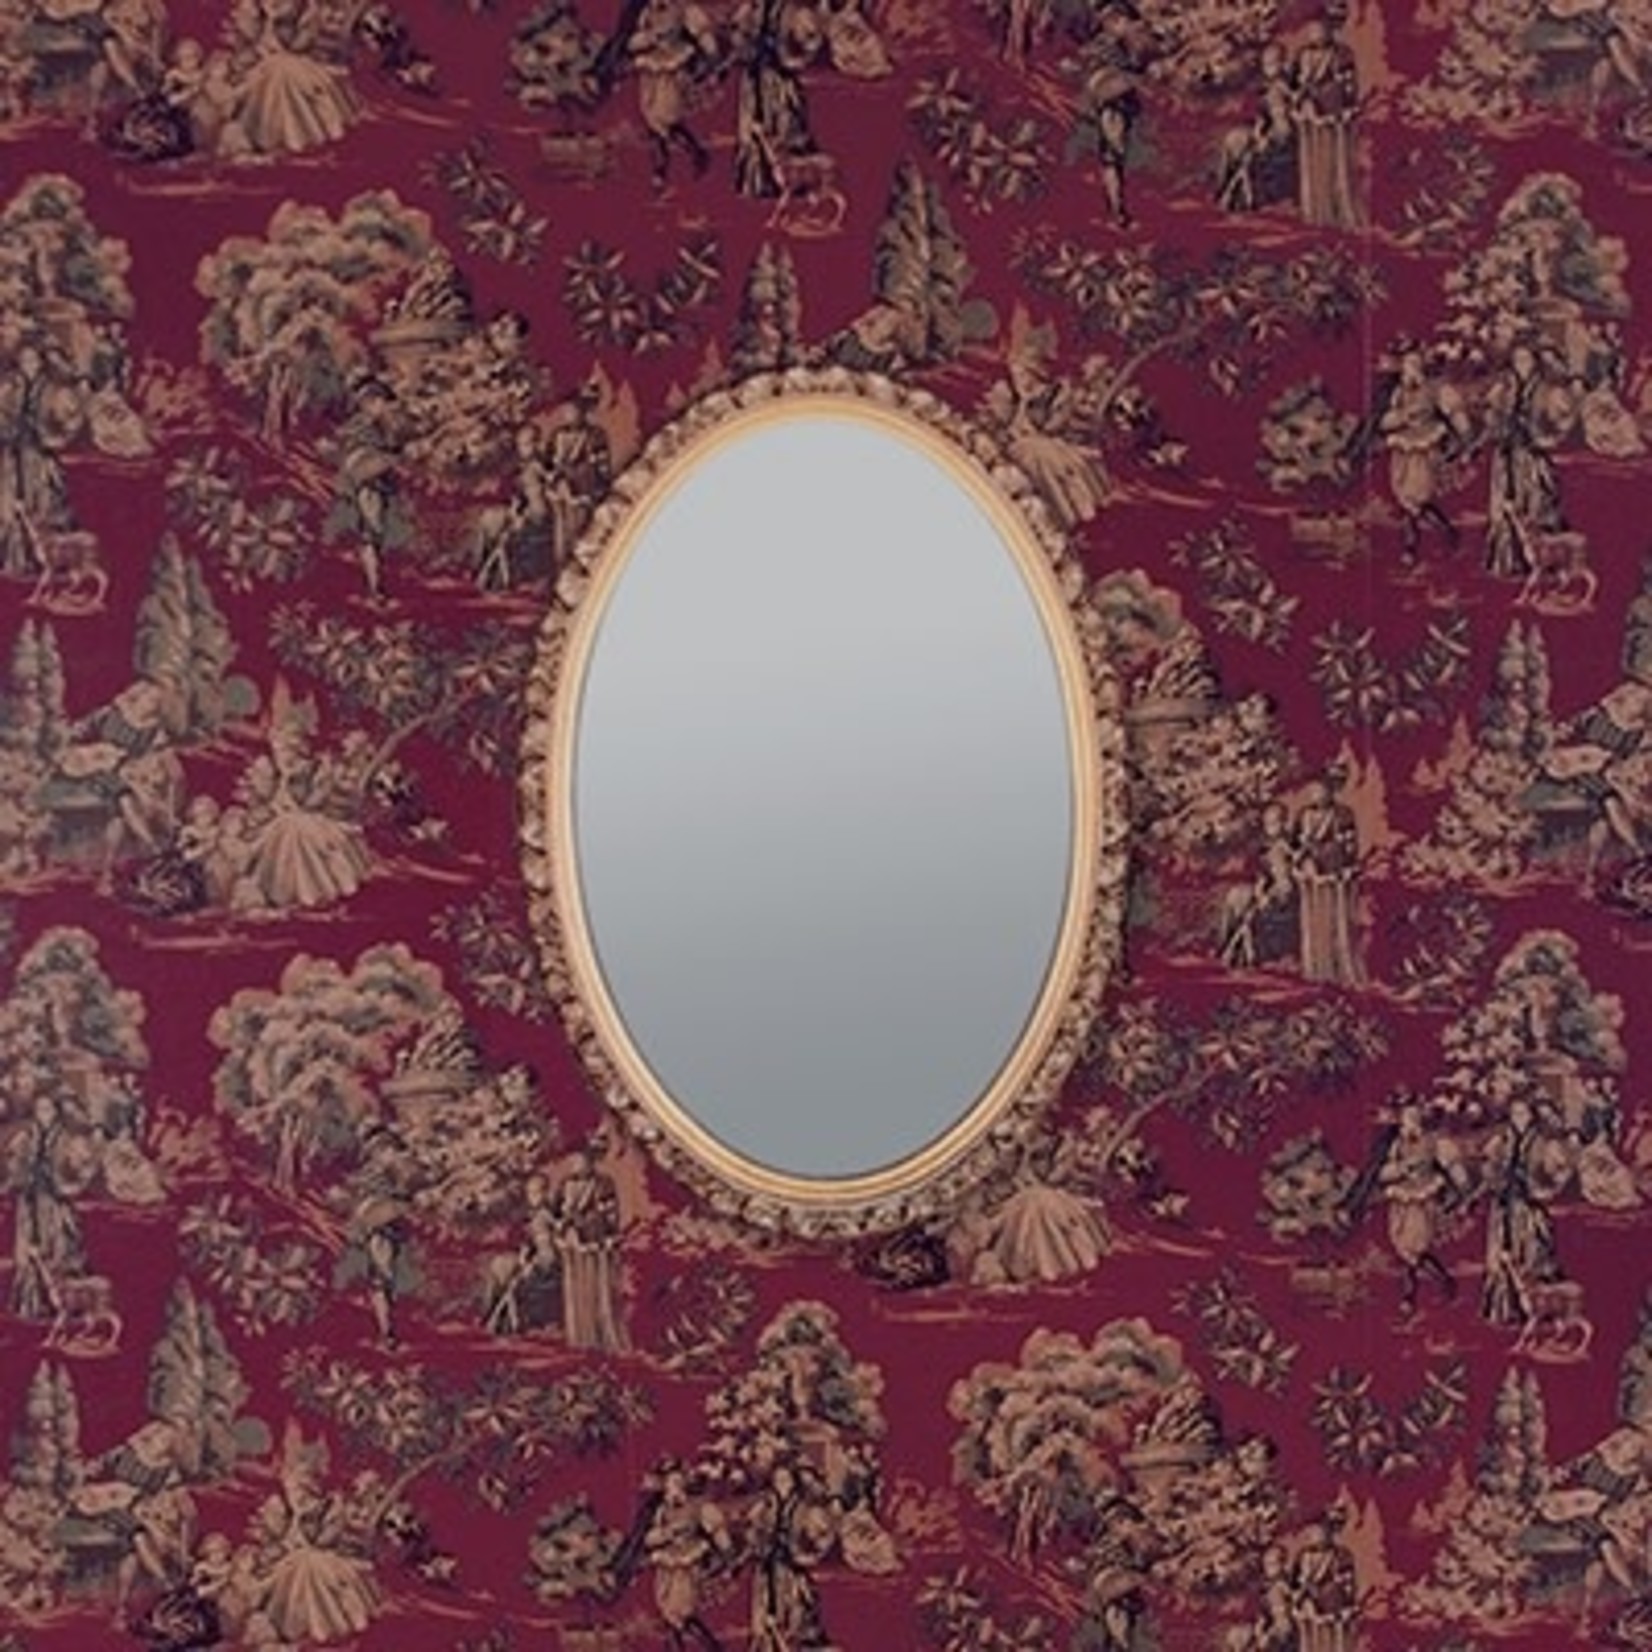 [New] Bright Eyes - Fevers & Mirrors (2LP)